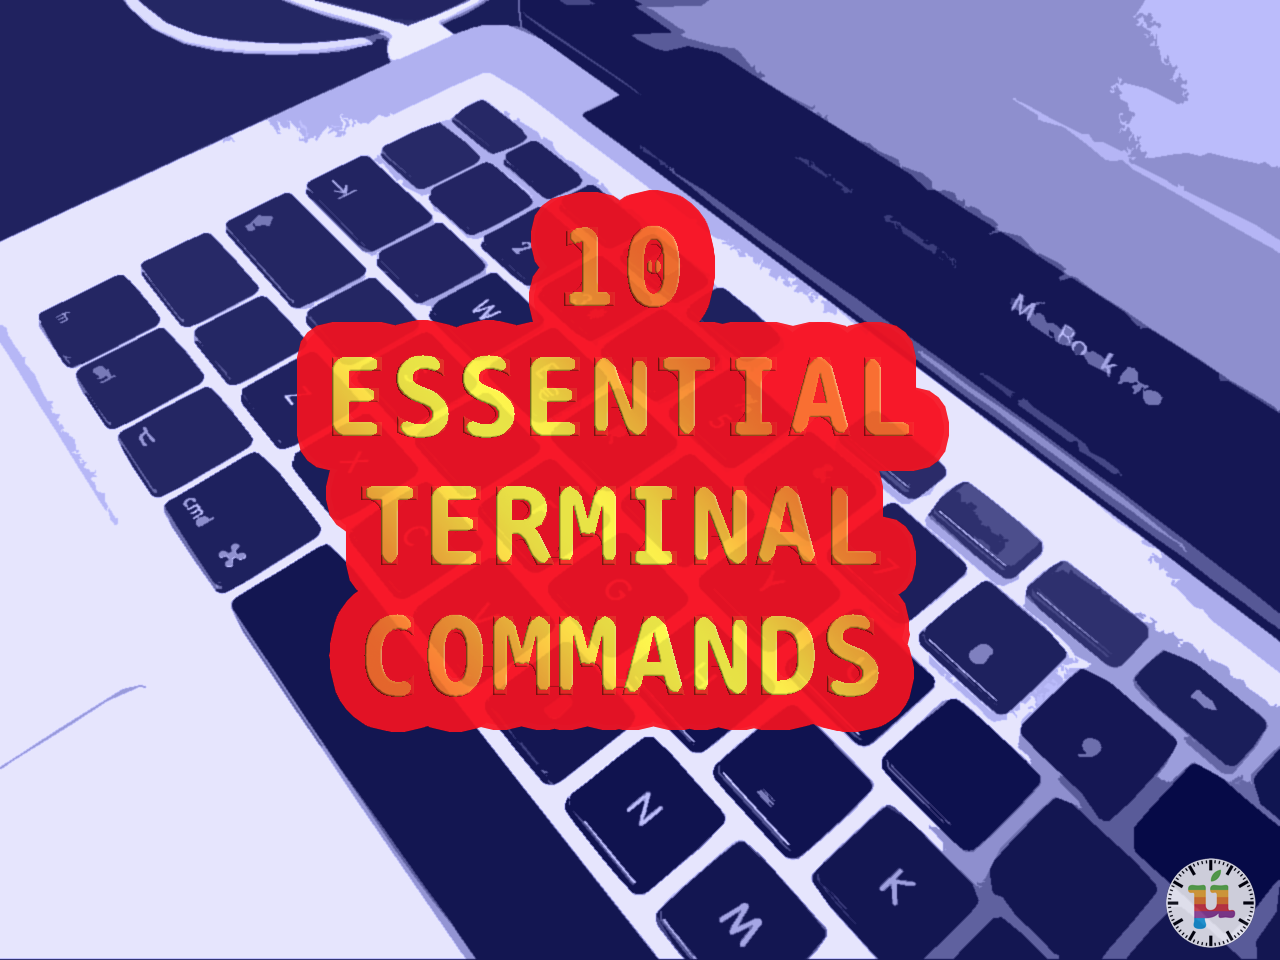 How to use Terminal on Mac: Basic commands and functions